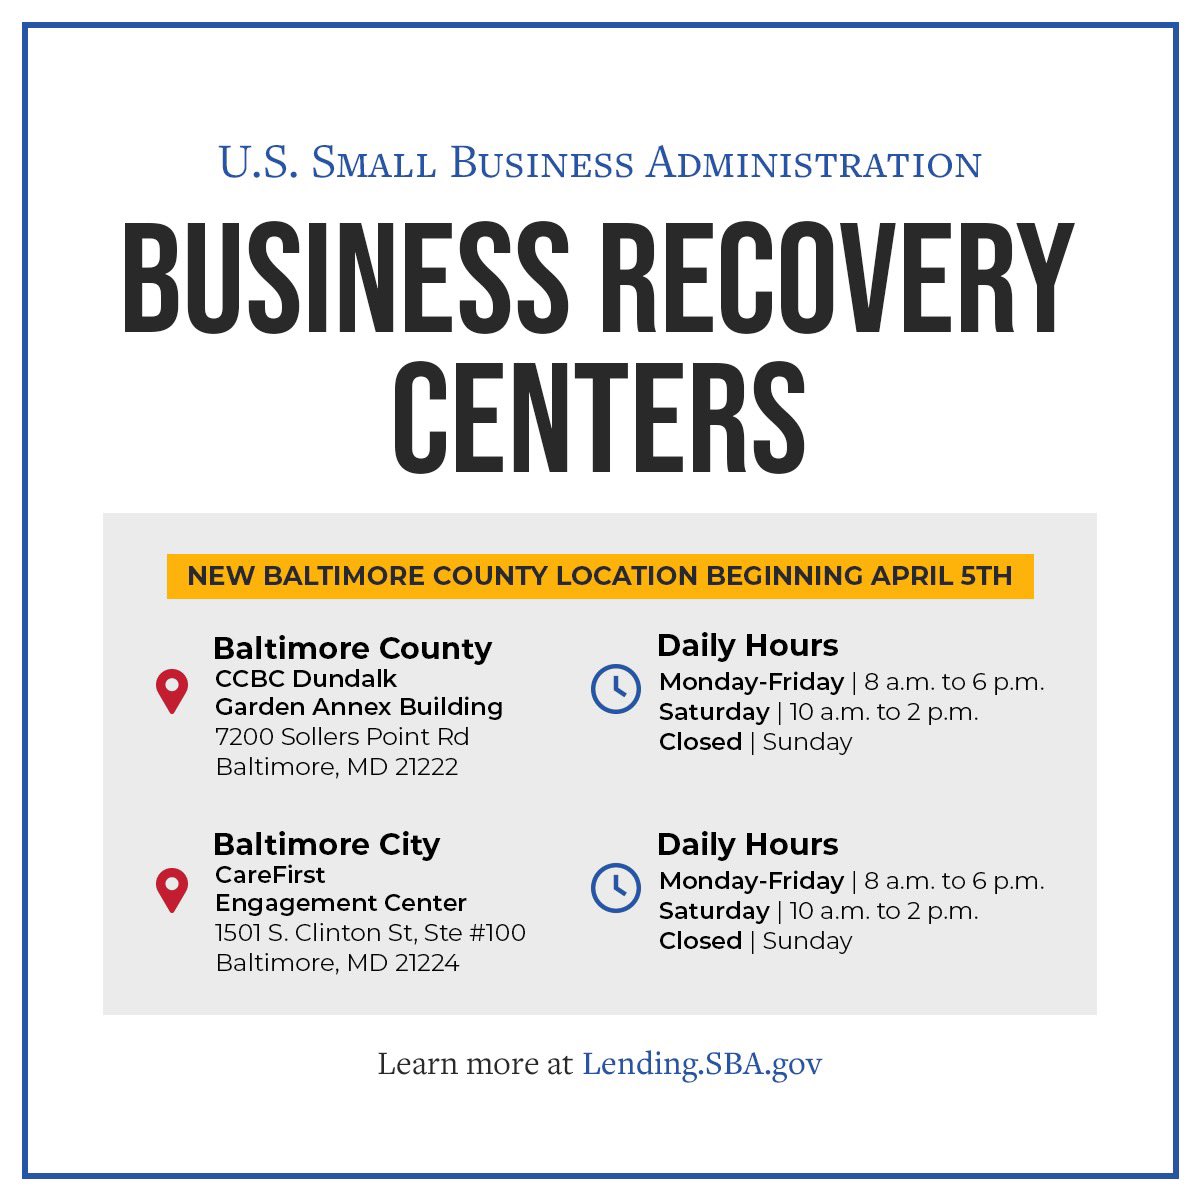 .@SBAgov is operating the following Business Recovery Centers to assist business owners in completing disaster loan applications, accept documents for existing applications, and provide status updates on loan applications. lending.sba.gov